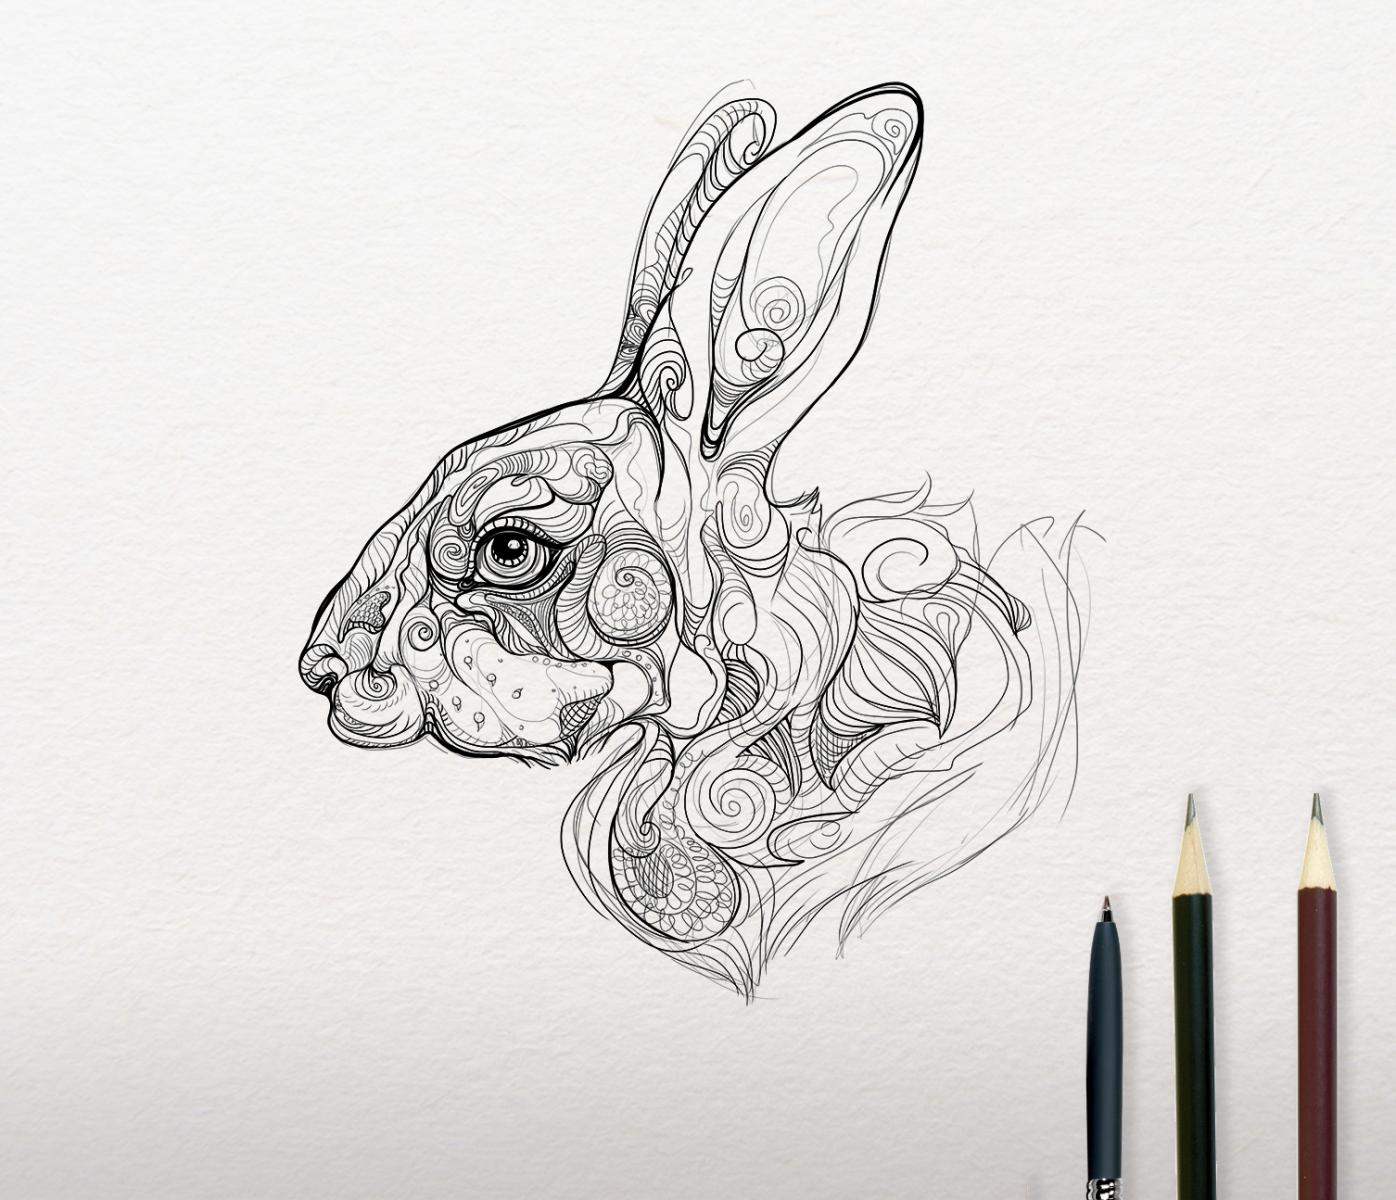 Mosaic rabbit embroidery sketch